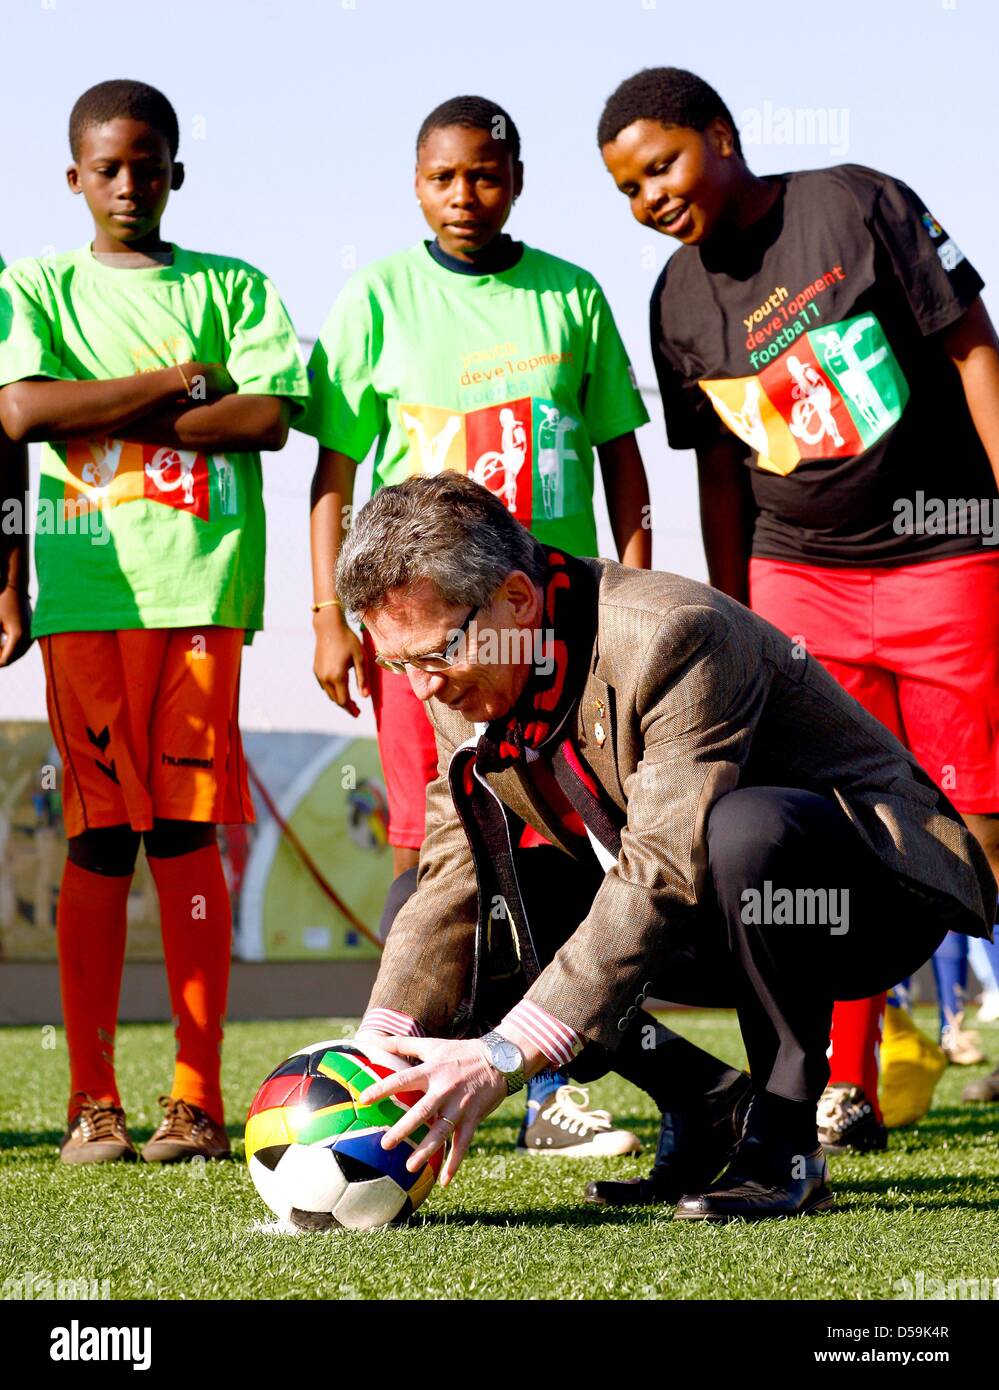 German interior minister Thomas de Maiziere prepares for a penalty kick watched by young South African football players during the opening of a football pitch at the Orange Farm township, about 30km south of Johannesburg, South Africa on 27 June 2010. De Maiziere is on a three-day visit to South Africa. Photo: Kerim Okten  +++(c) dpa - Bildfunk+++ Stock Photo